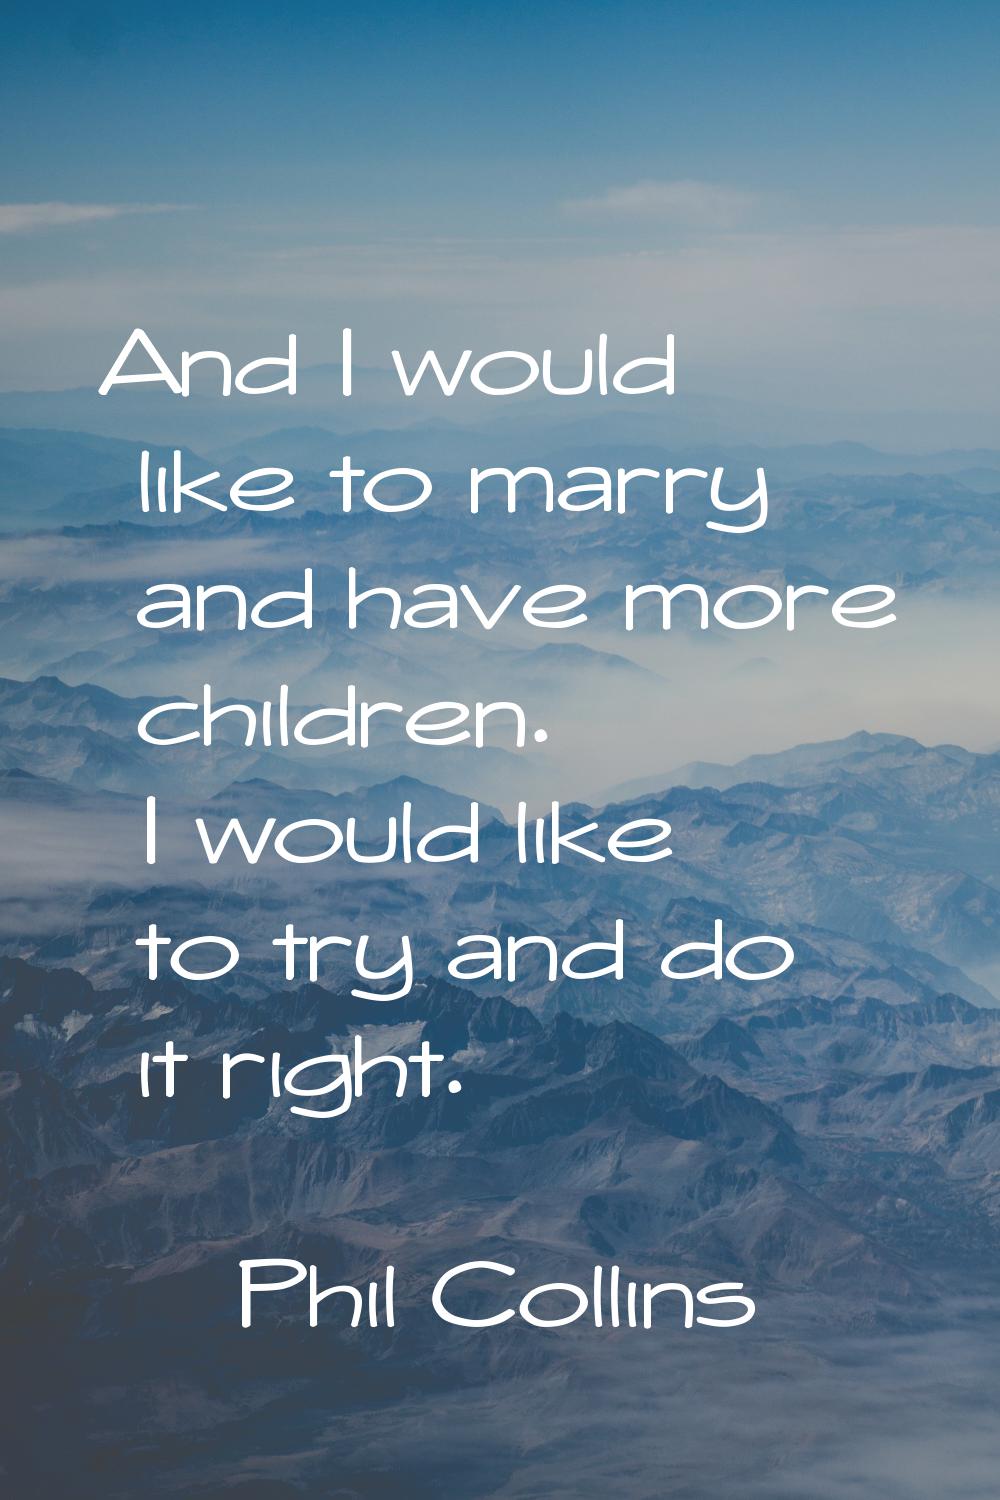 And I would like to marry and have more children. I would like to try and do it right.